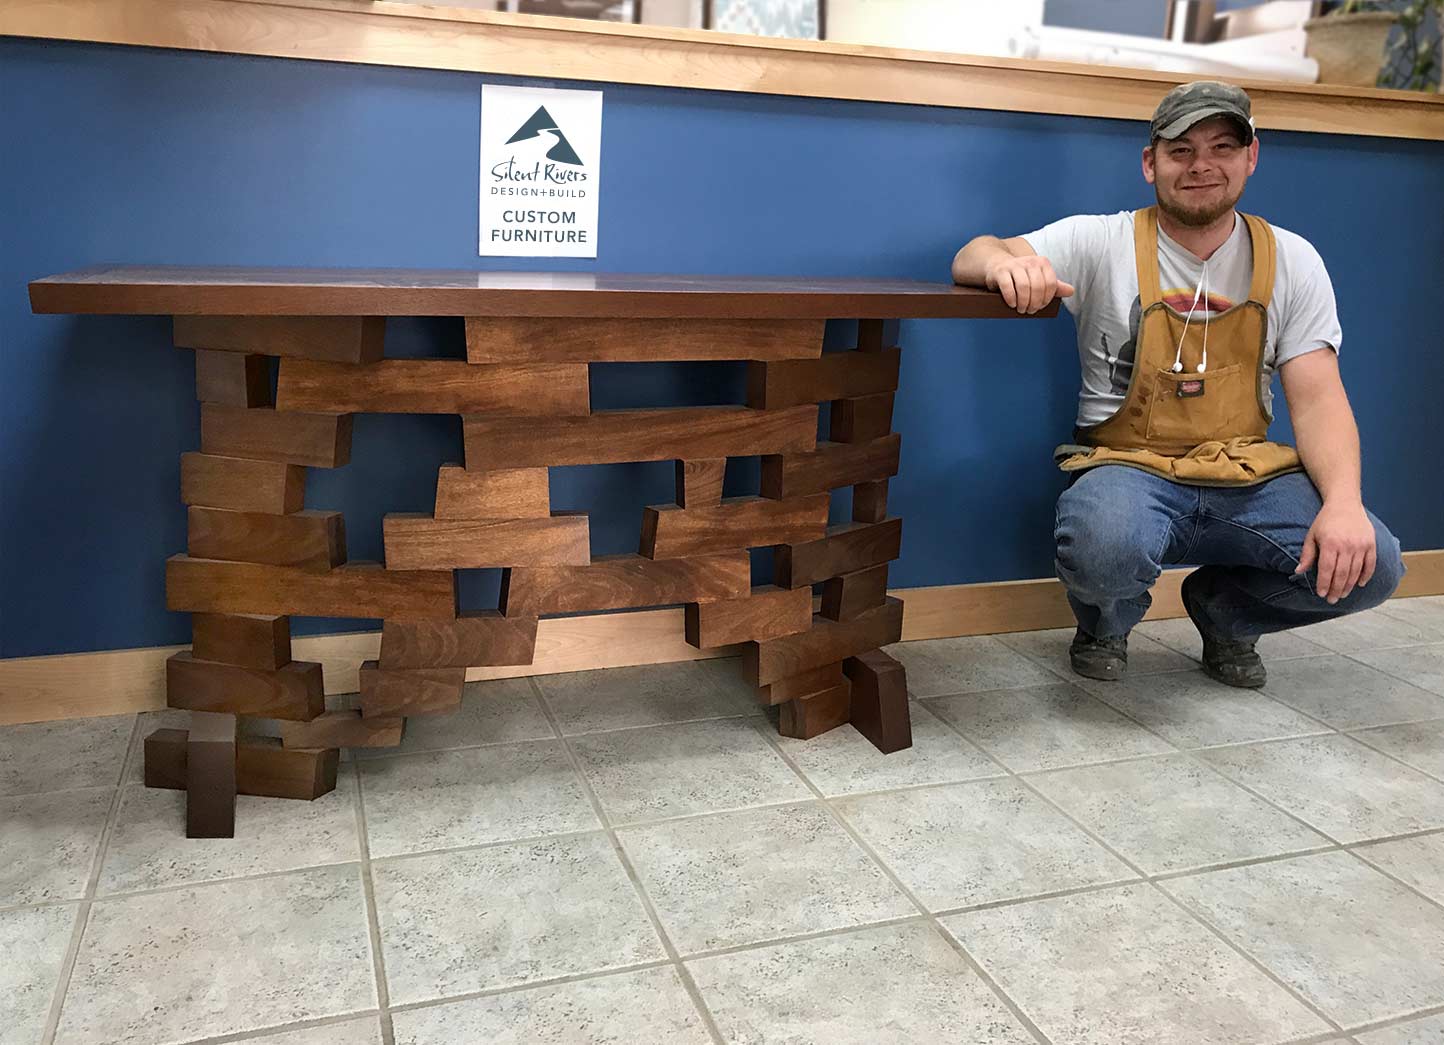 Alex Schlepphorst from the Silent Rivers Design+Build Woodshop and Woodworking Team in Des Moines, Iowa created this custom furniture console table out of scrap blocks of wood along with Tom Bloxham